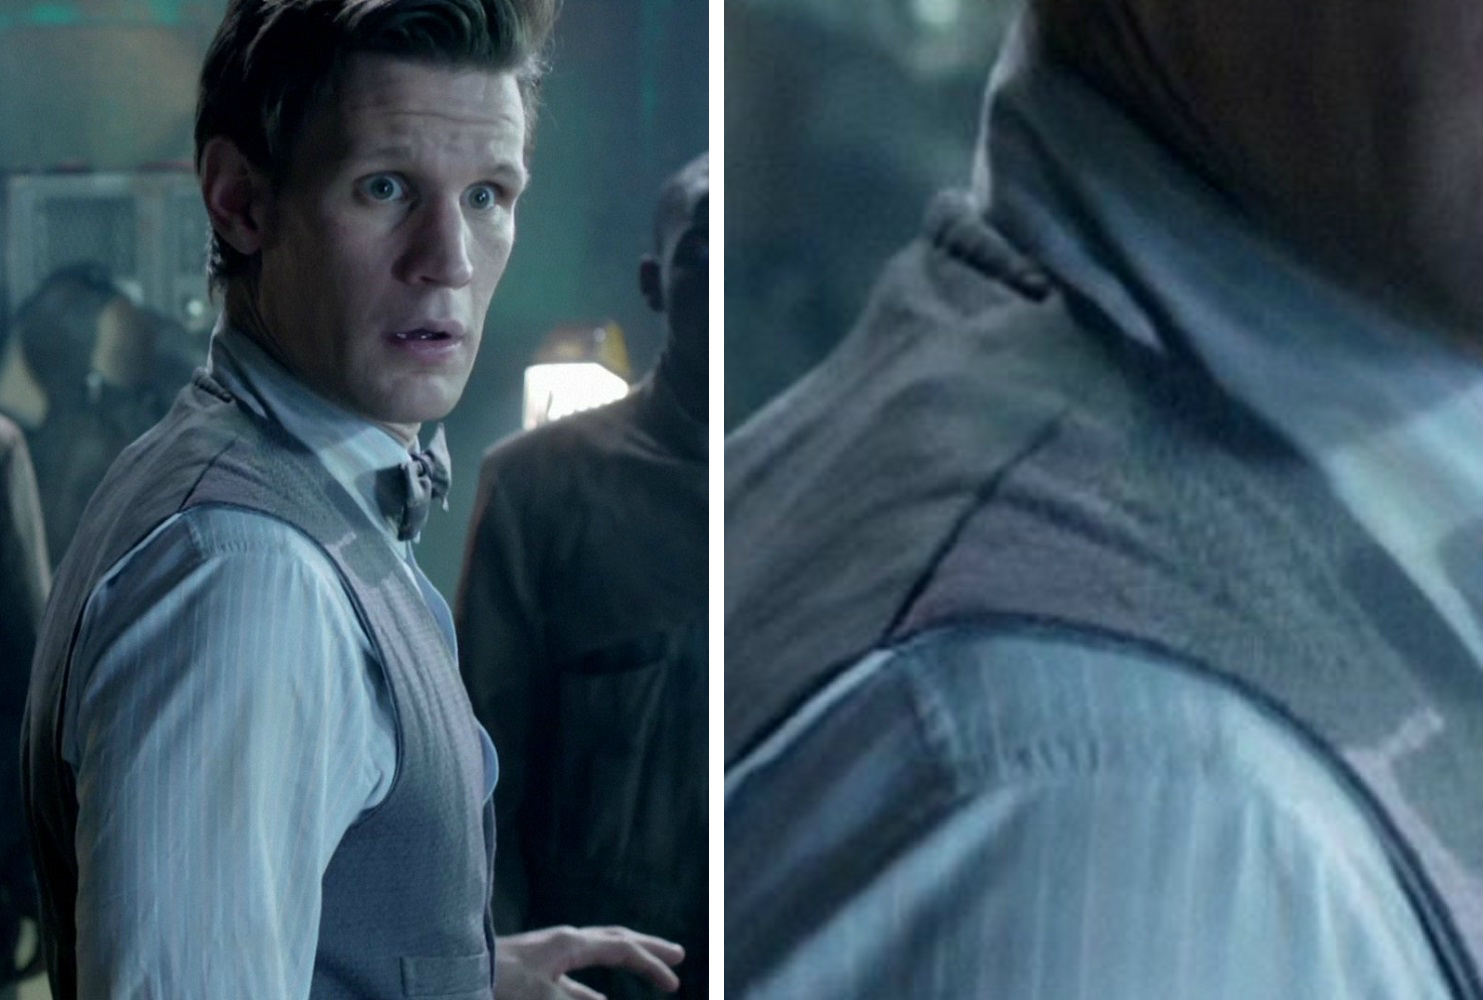 11th Doctor "scales" waistcoat style